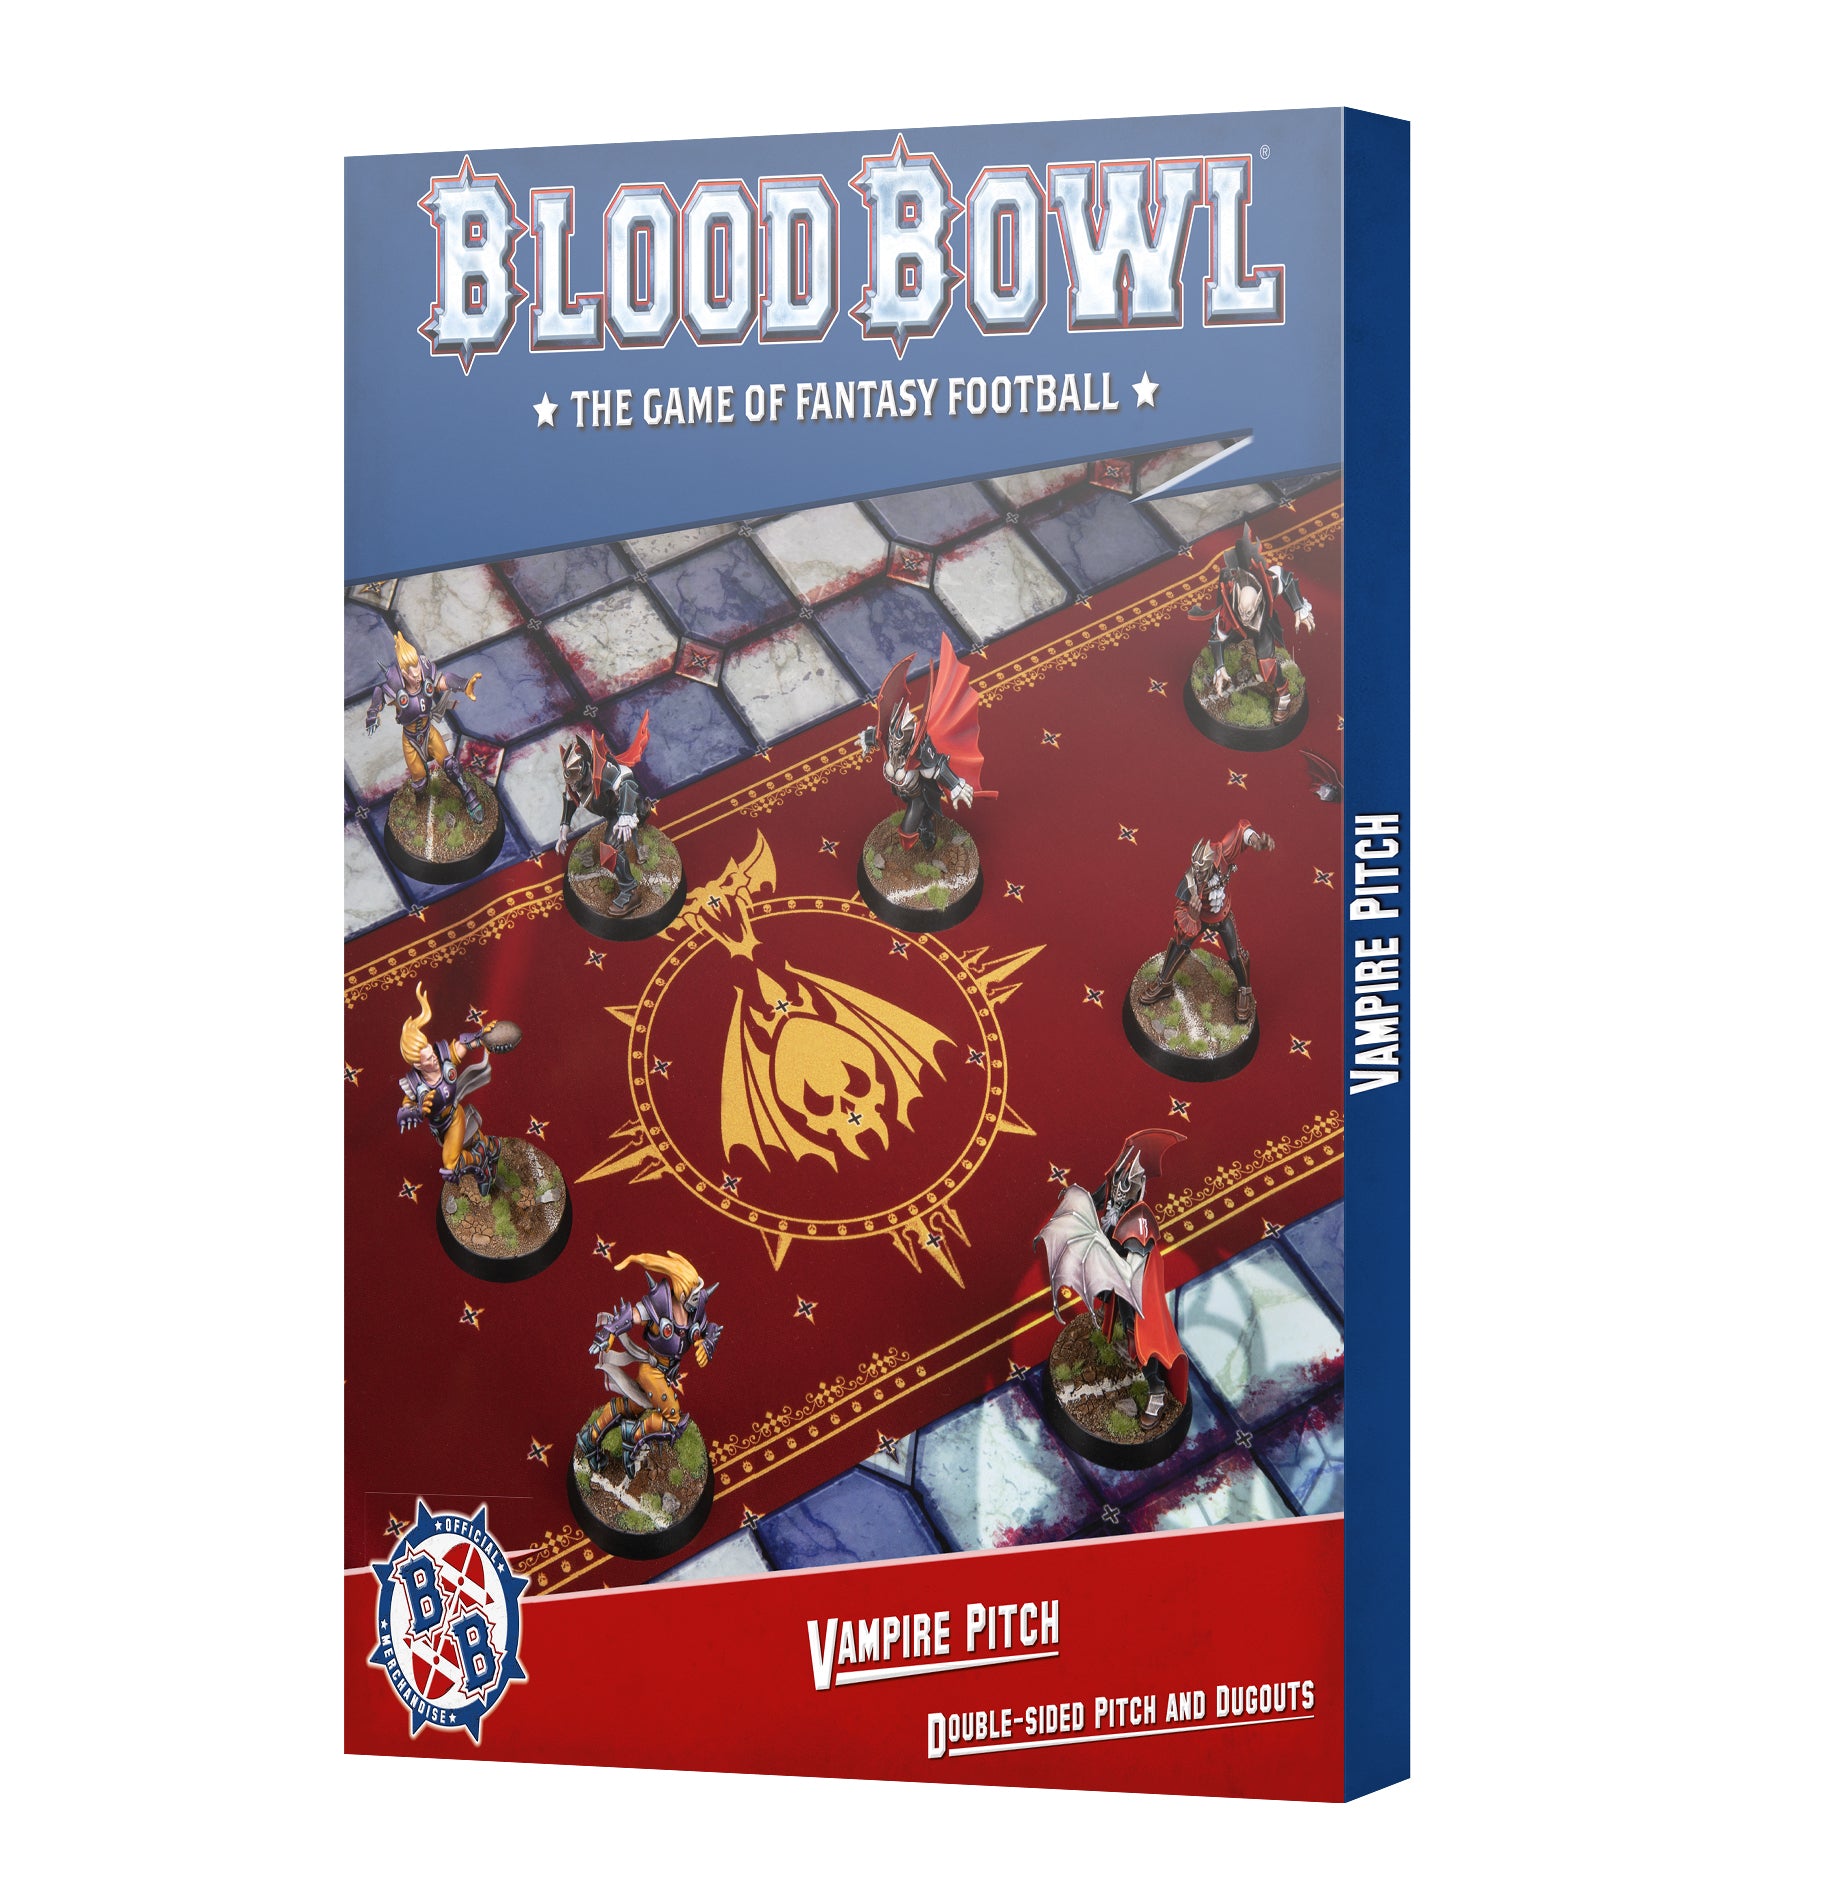 BLOOD BOWL VAMPIRE TEAM PITCH ET DUGOUTS | BD Cosmos